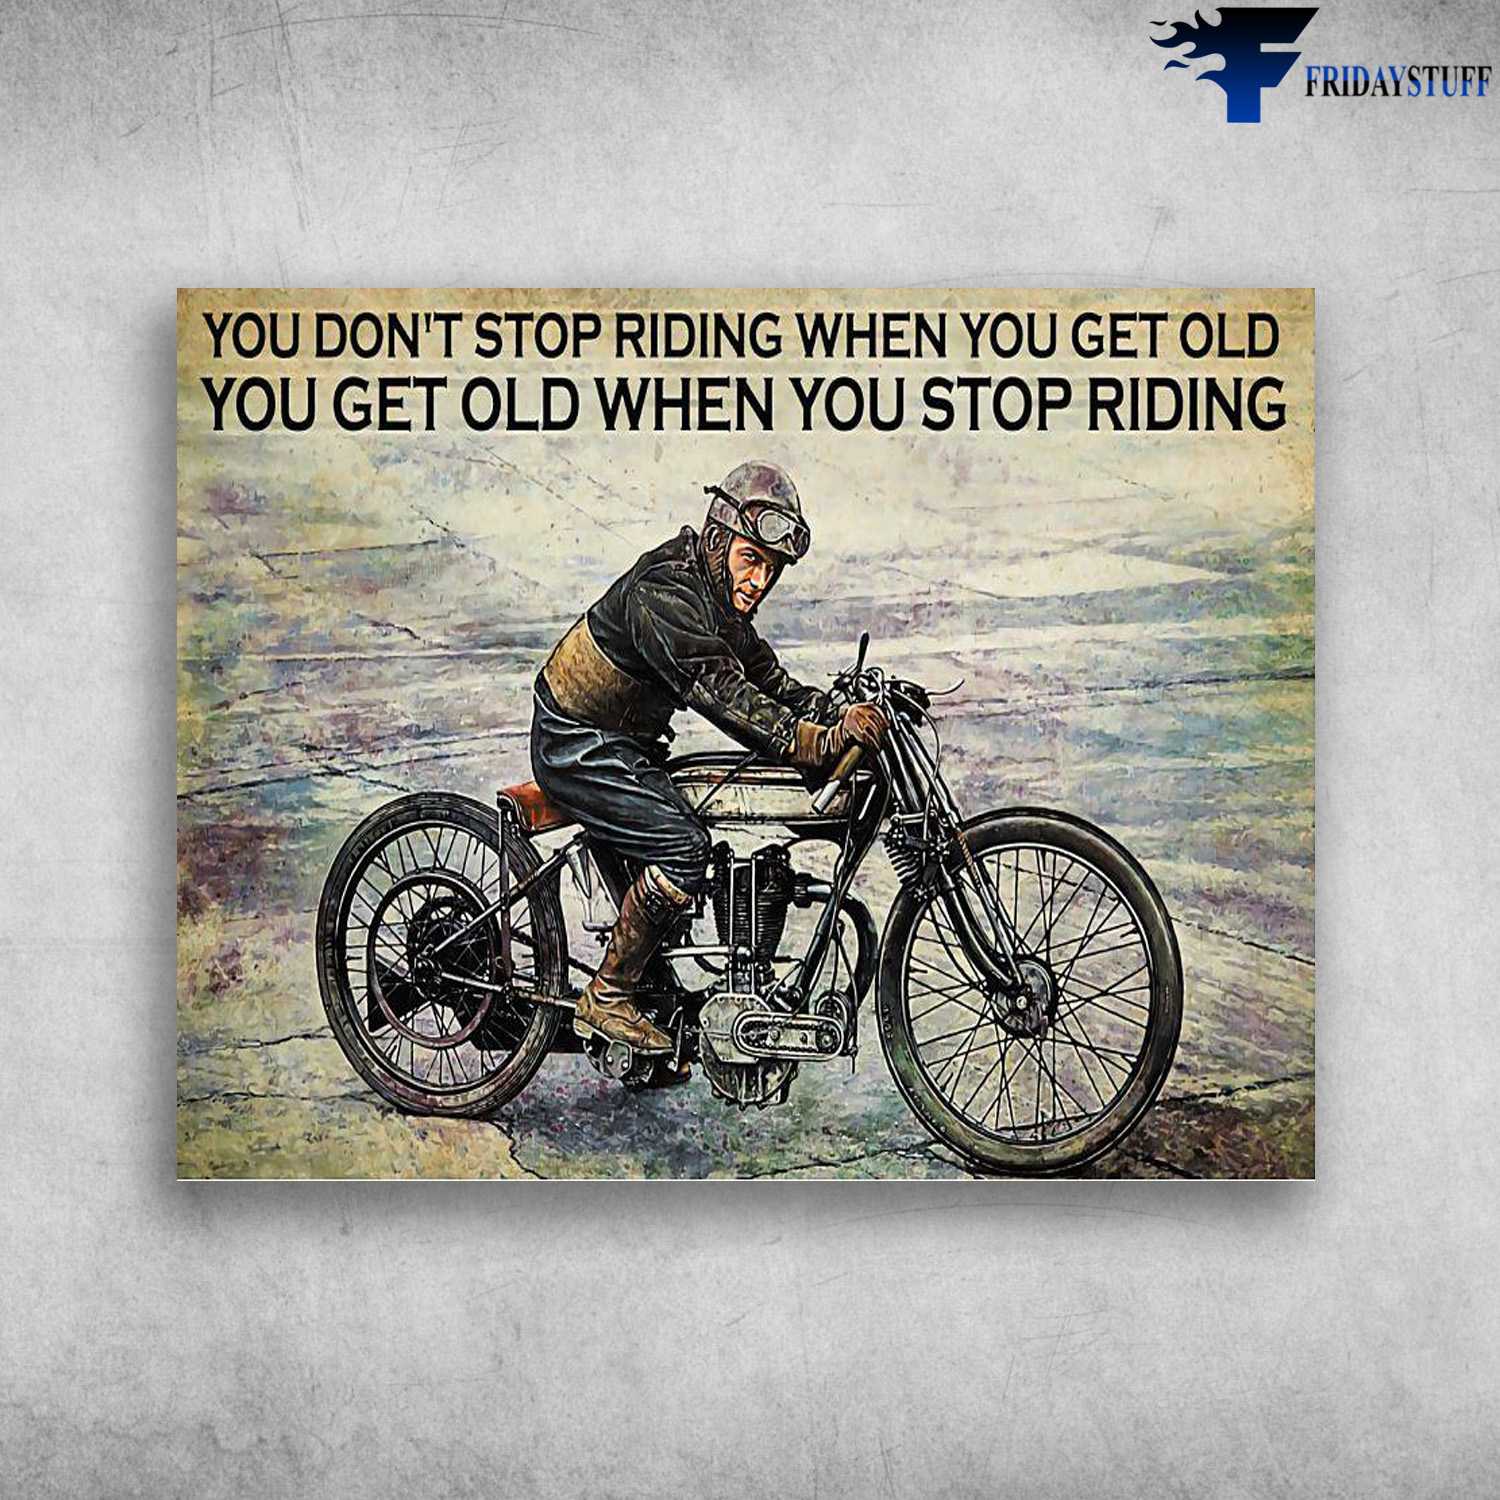 Motorcycle Man, Old Biker, You Don't Stop Riding When You Get Old, You Get Old When You Stop Riding